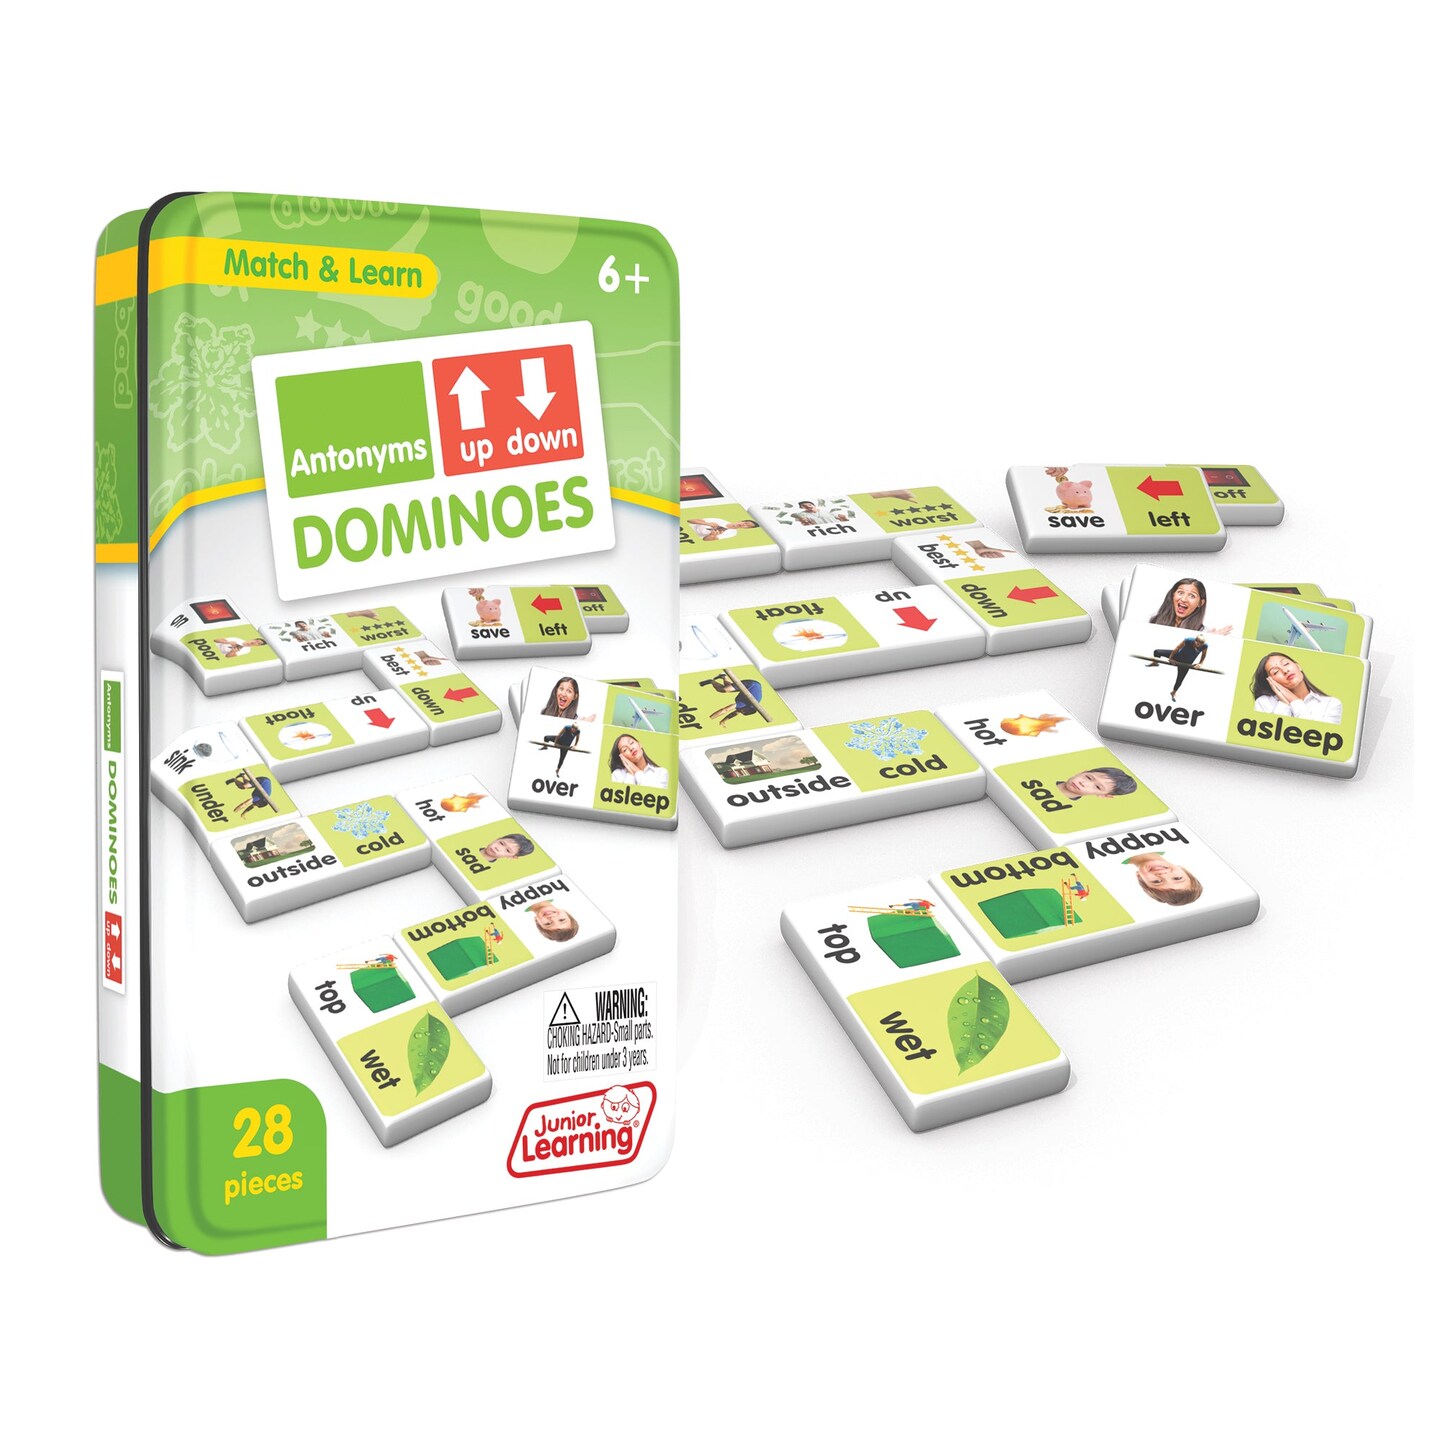 Antonyms Match &#x26; Learn Dominoes, Pack of 2